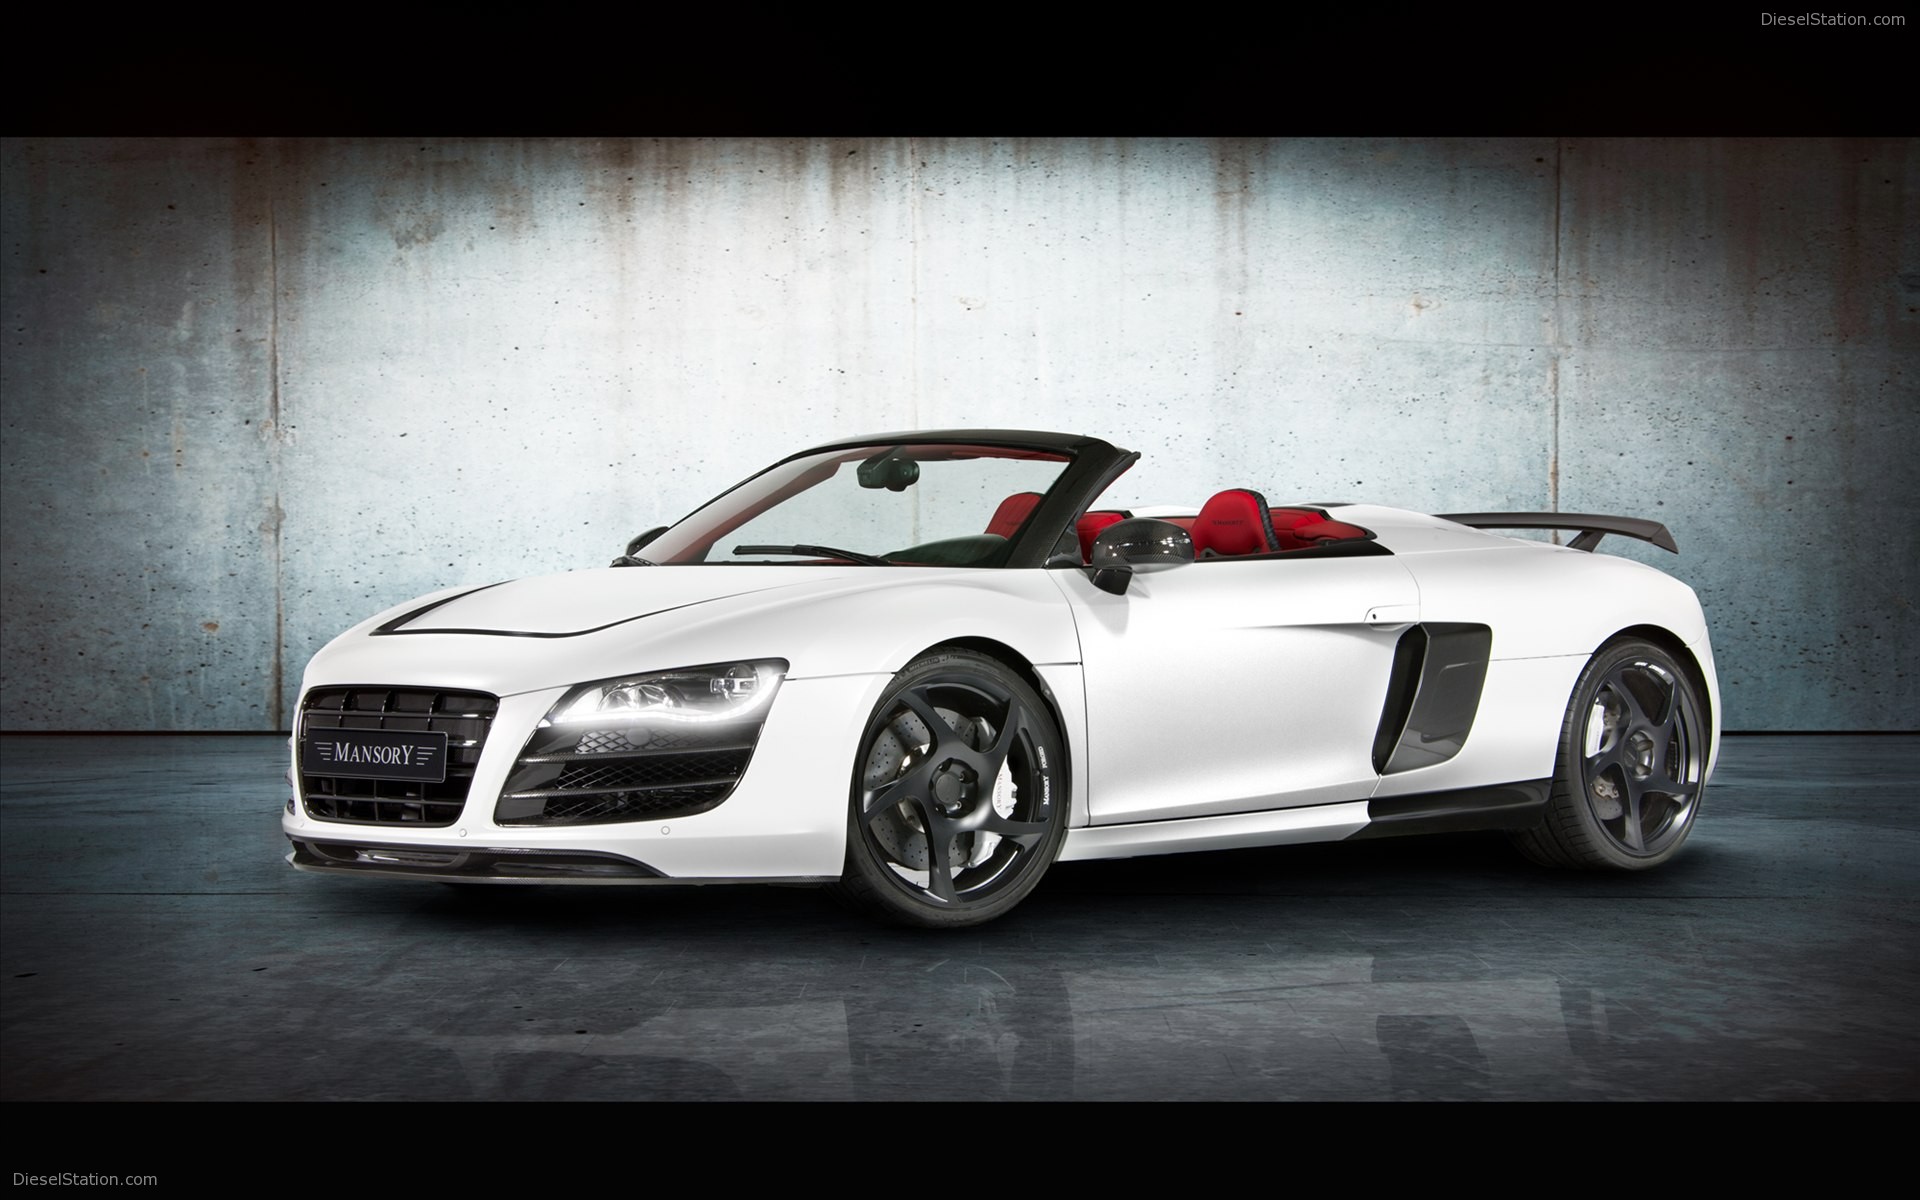 Mansory Audi R8 Spyder 2011 Widescreen Exotic Car Wallpapers 08 of 26 1920x1200